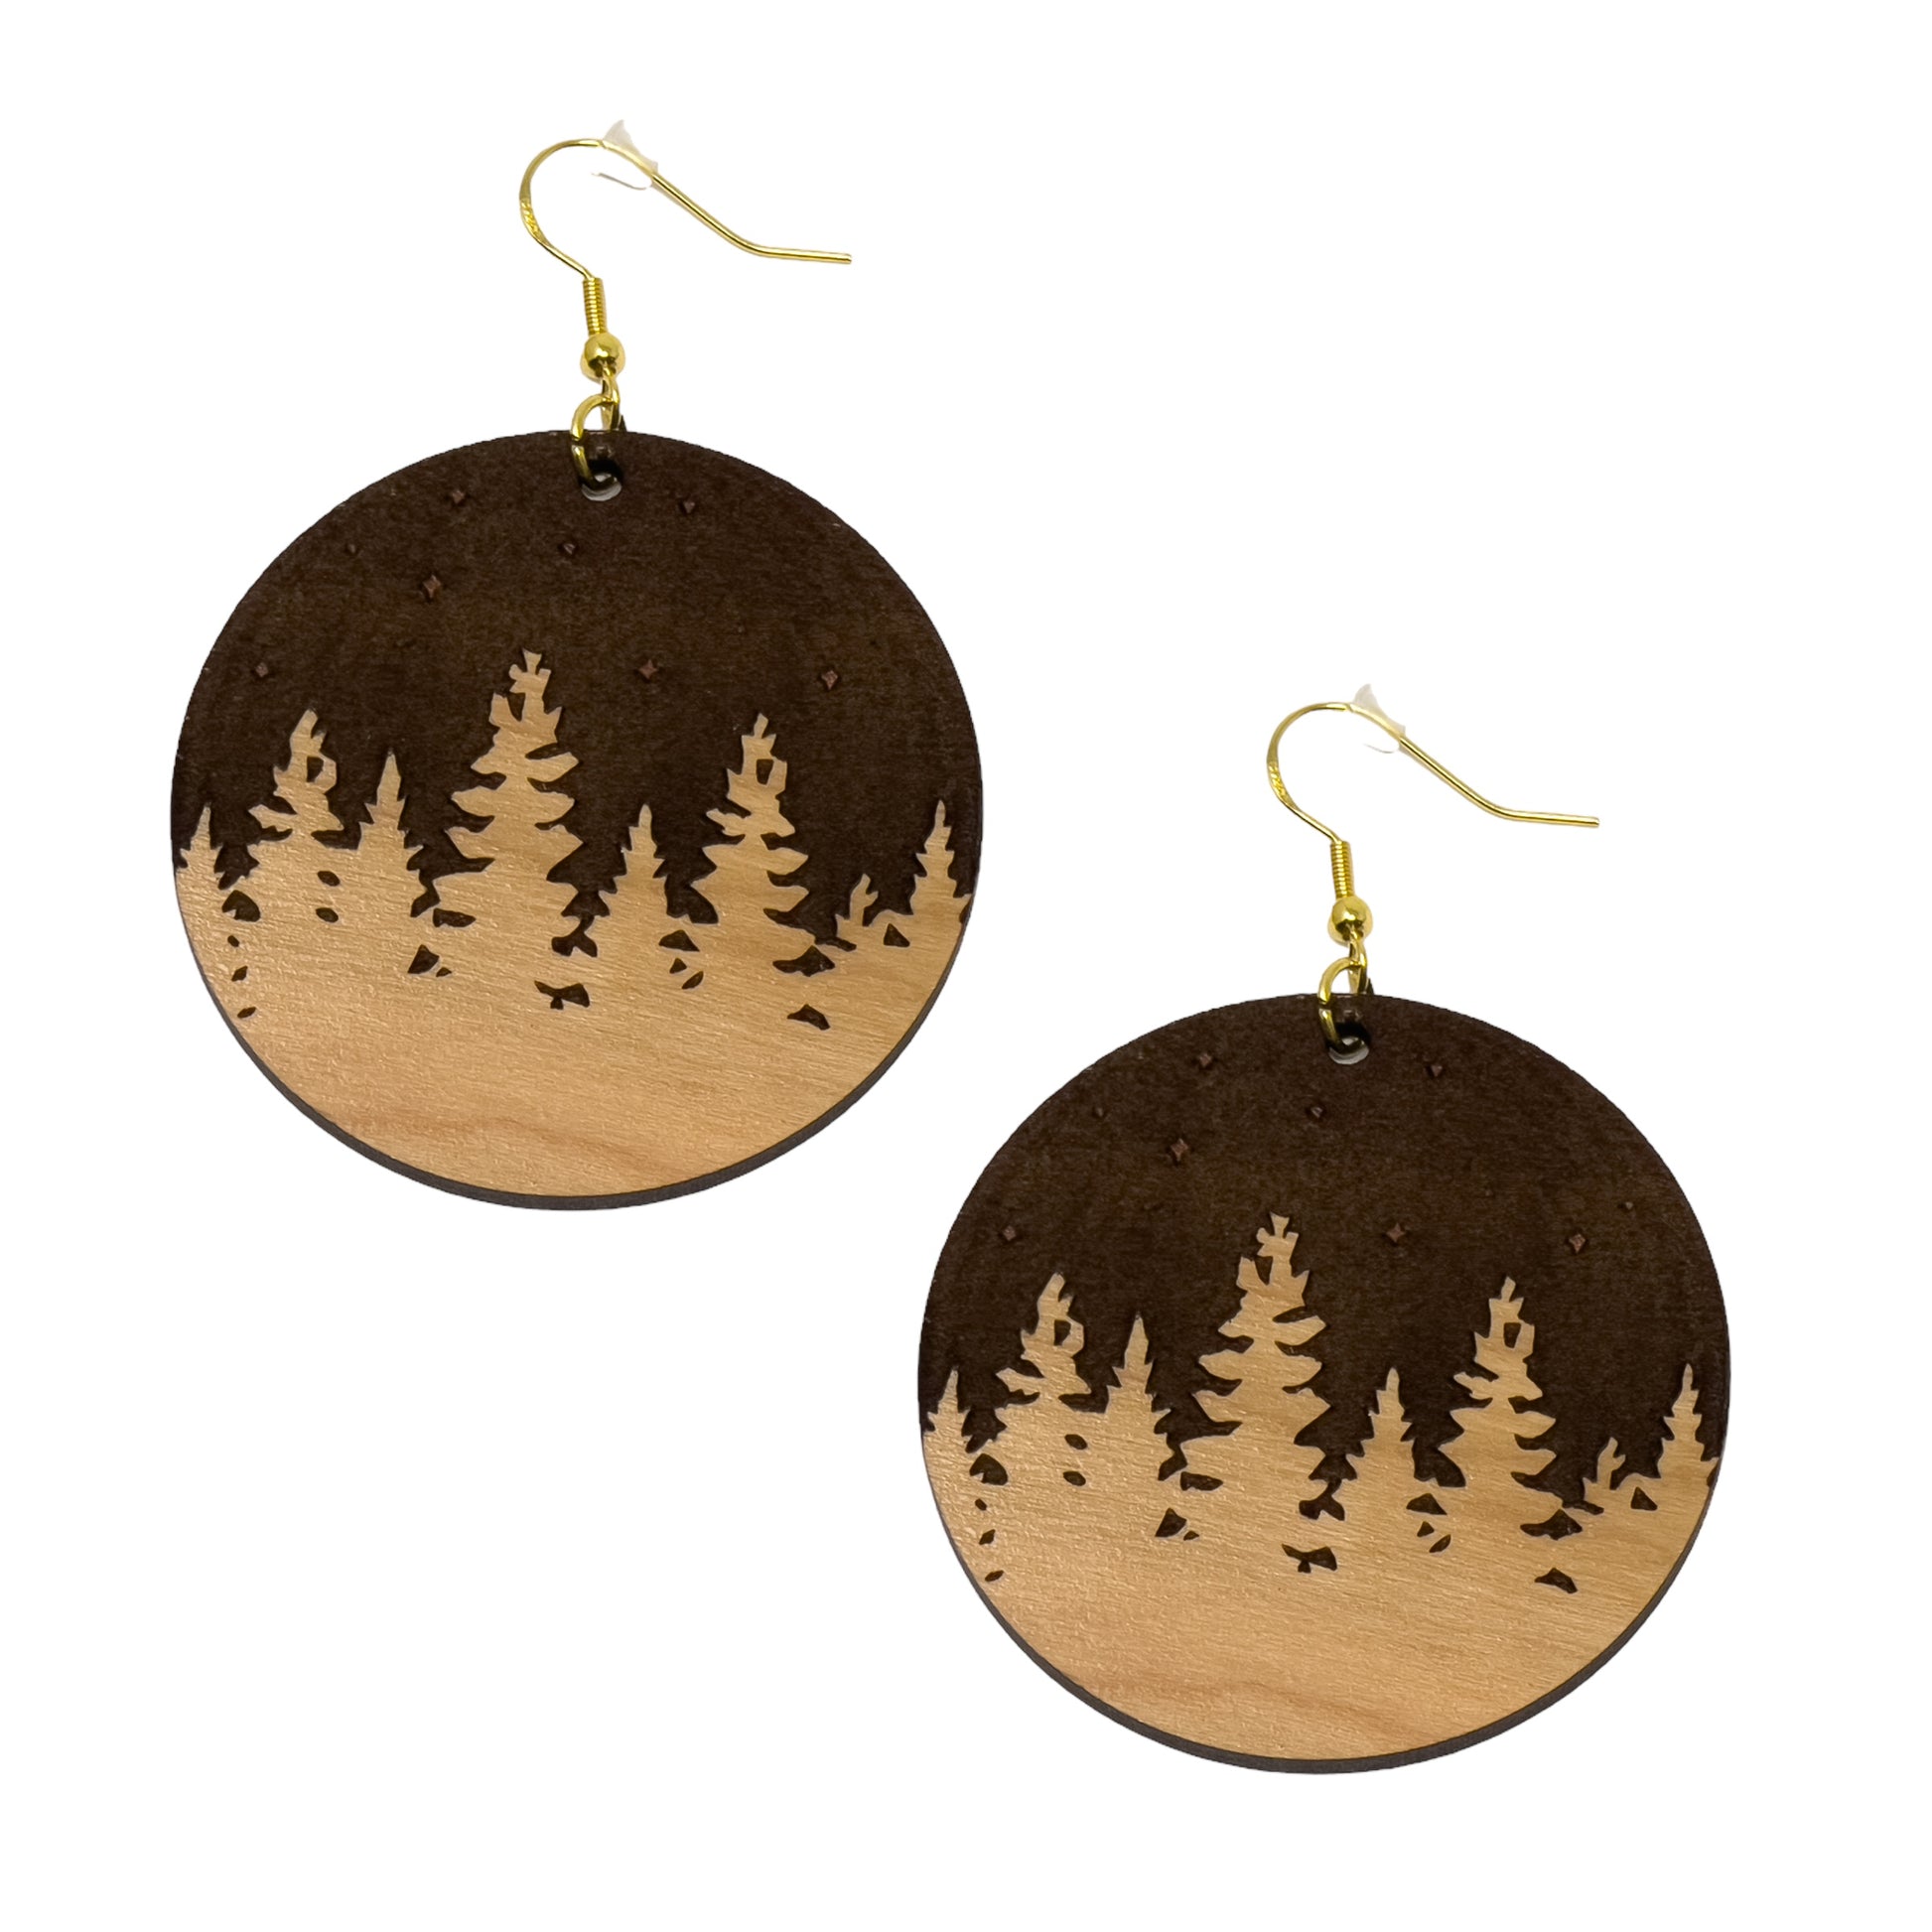 Pine Trees Mountain Earrings, Cute Holiday Christmas Dangle Earrings, Round Wood Earrings, Country Xmas Jewelry, Snowy Forest Nature Gifts